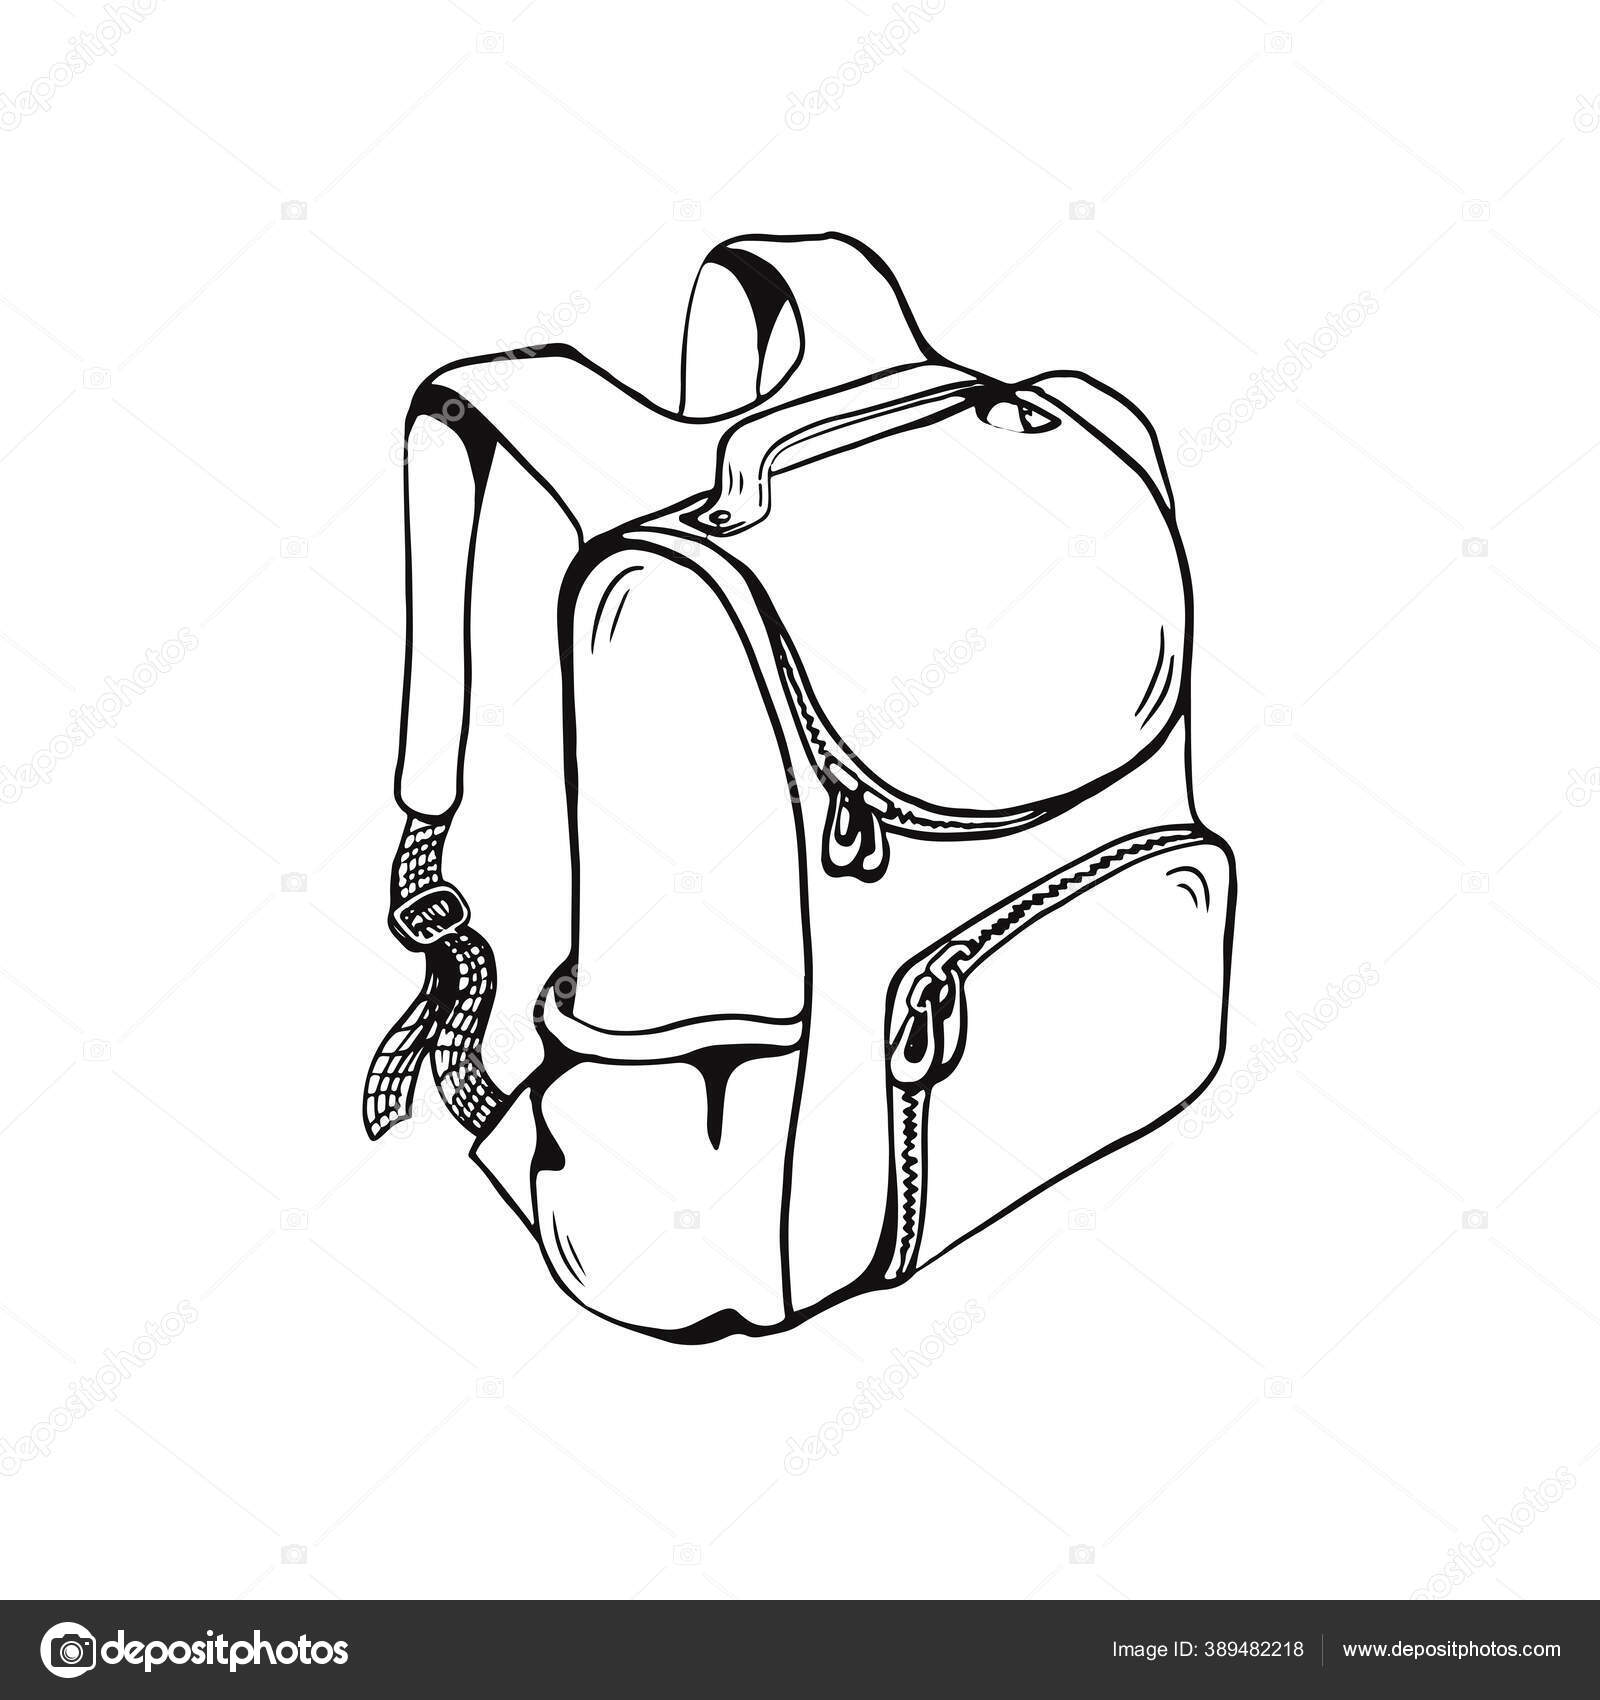 School Bag Three Quater View Outline Vector Sketches Isolated Vector Image By C Storonka Vector Stock 389482218